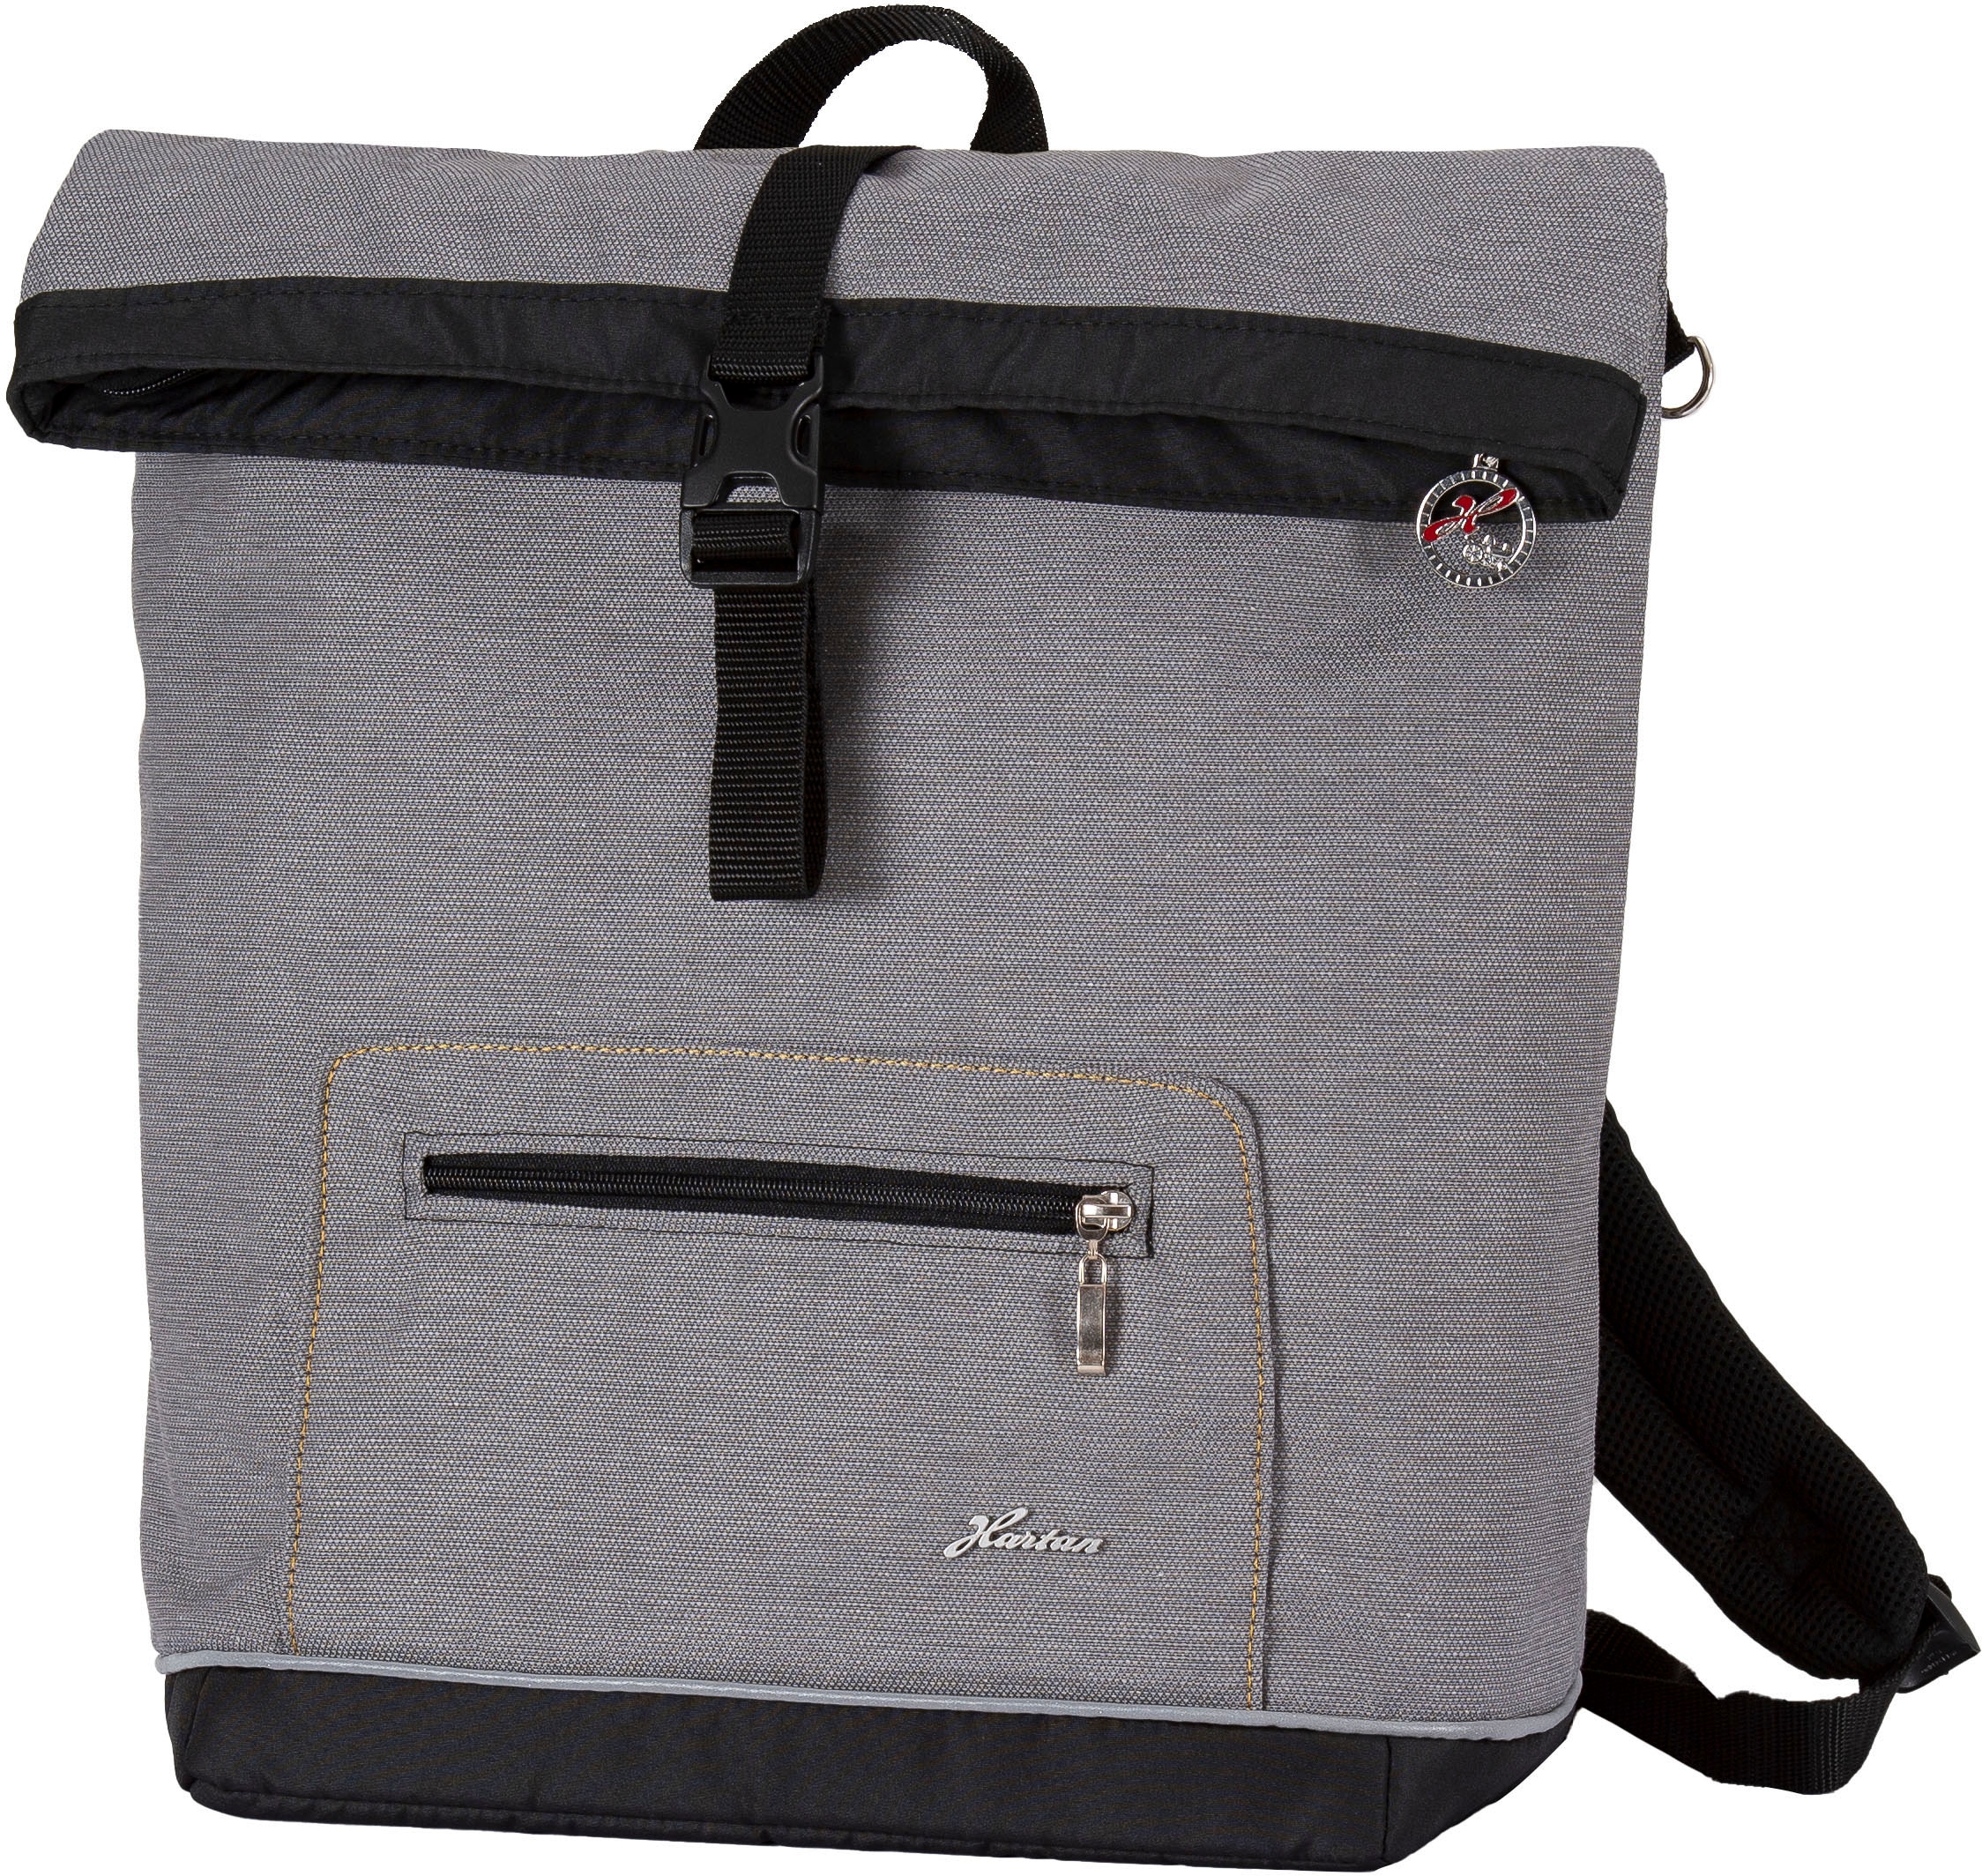 Hartan Wickelrucksack »Space bag - Casual Collection«, mit Thermofach; Made in Germany